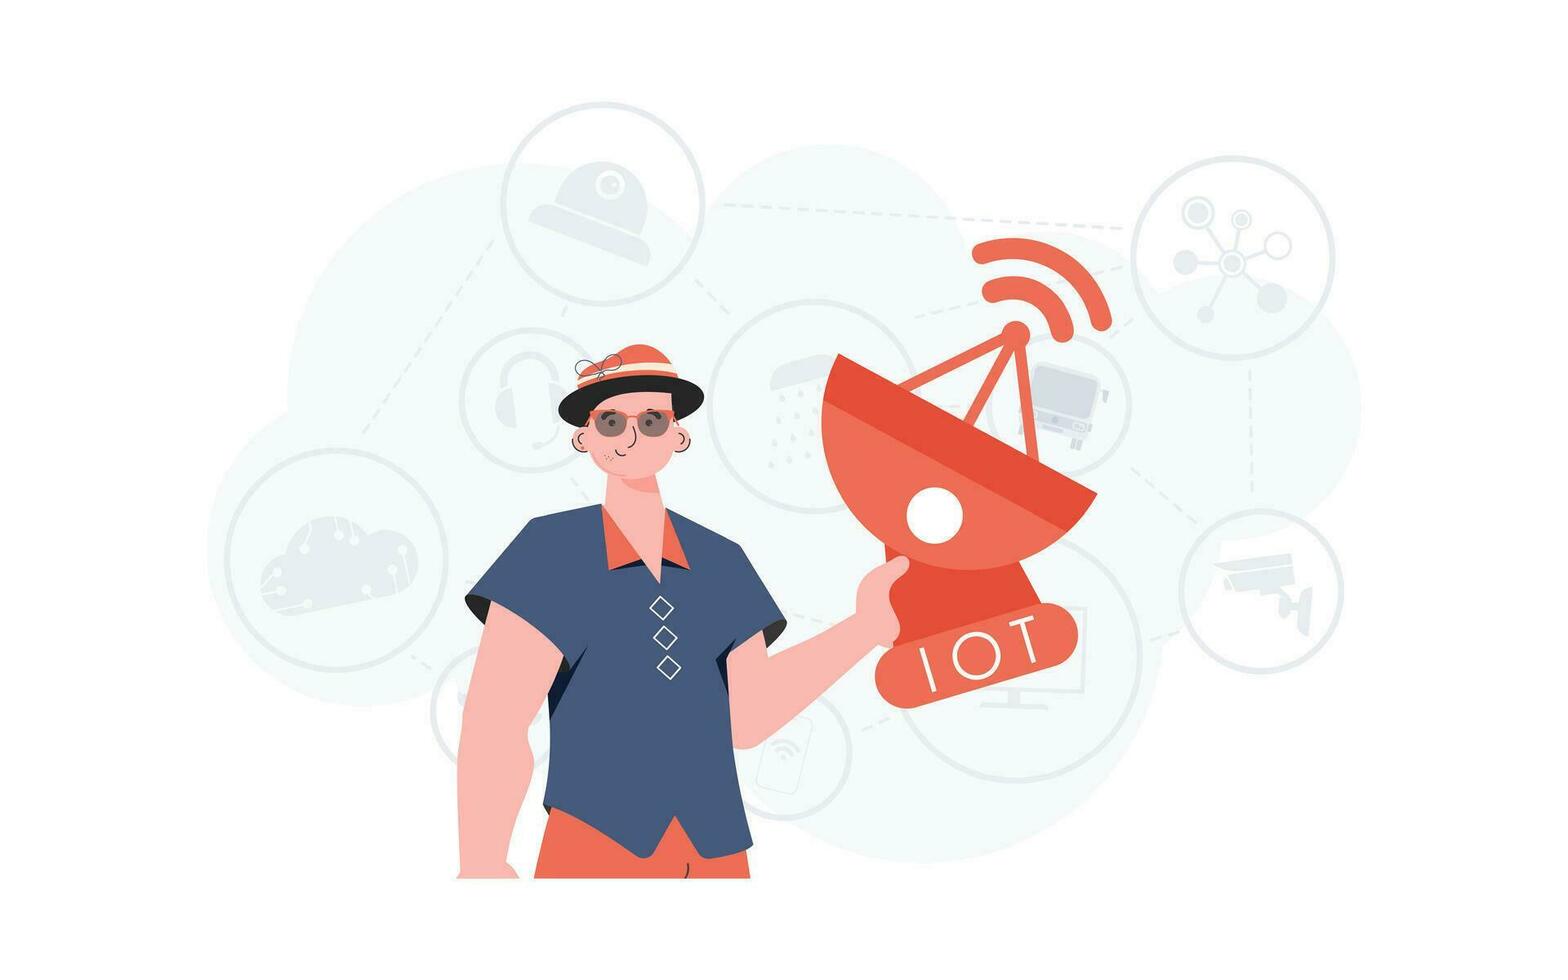 A man holds a satellite dish in his hands. Internet of things concept. Good for presentations and websites. Vector illustration in flat style.